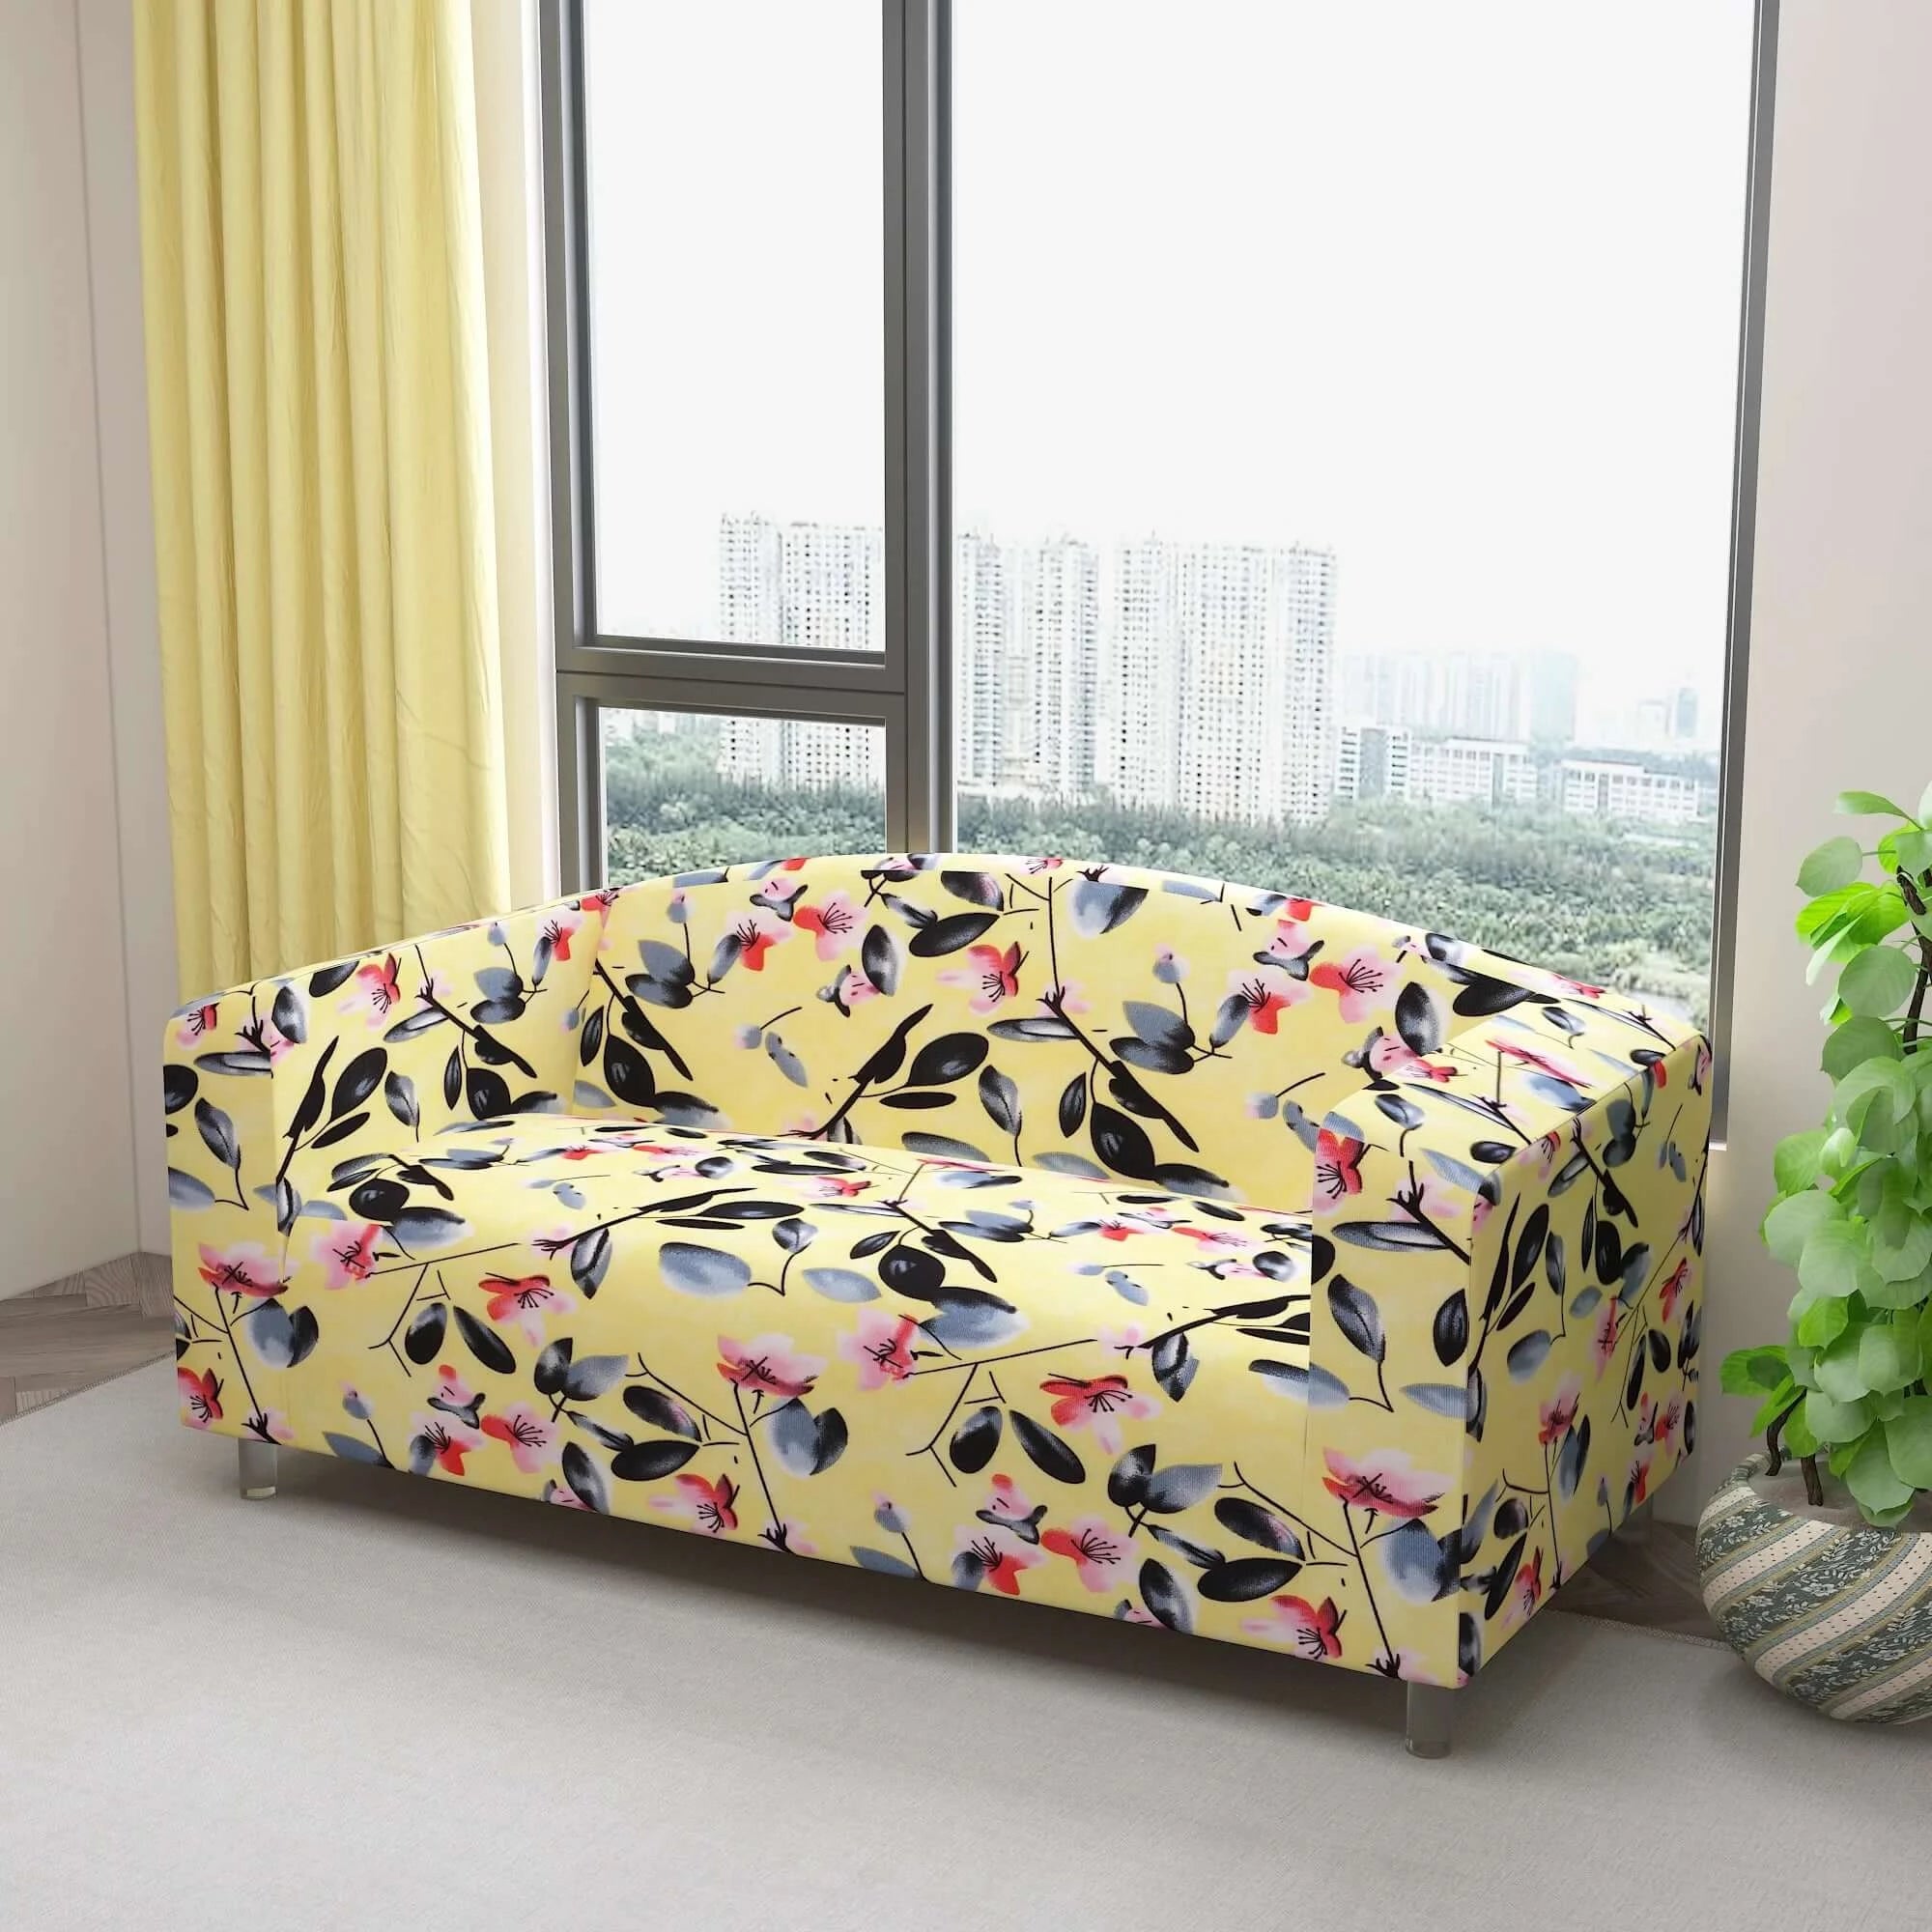 Marigold Printed Sofa Protector Cover Full Stretchable, MG10 - Dream Care Furnishings Private Limited